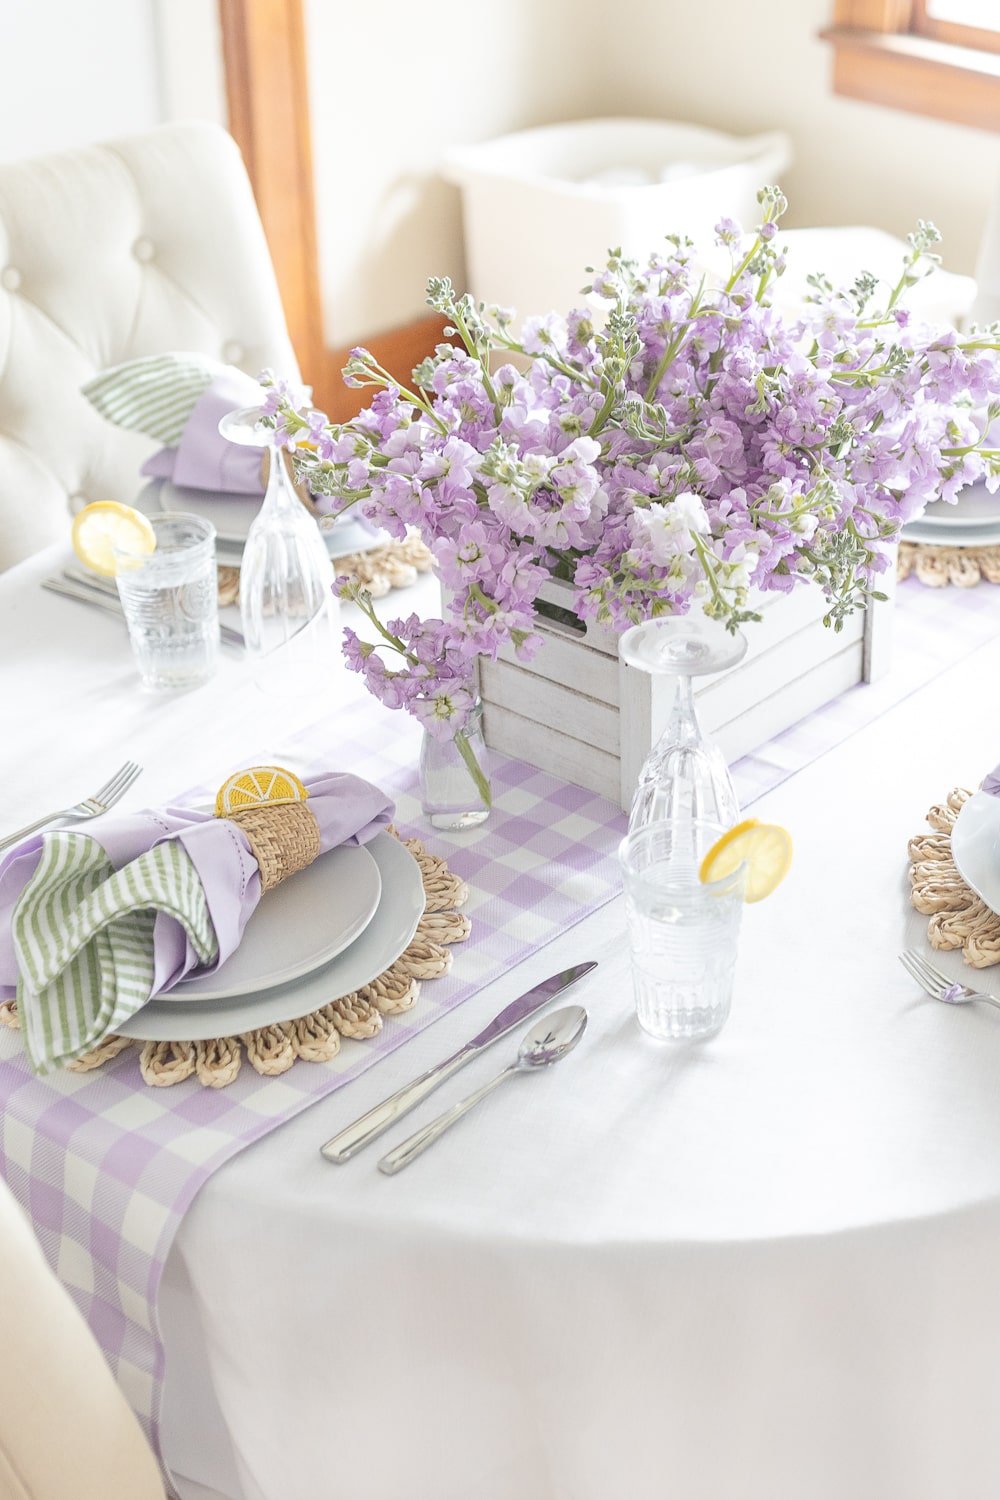 mother's day brunch table setting ideas from blogger Stephanie Ziajka on Diary of a Debutante